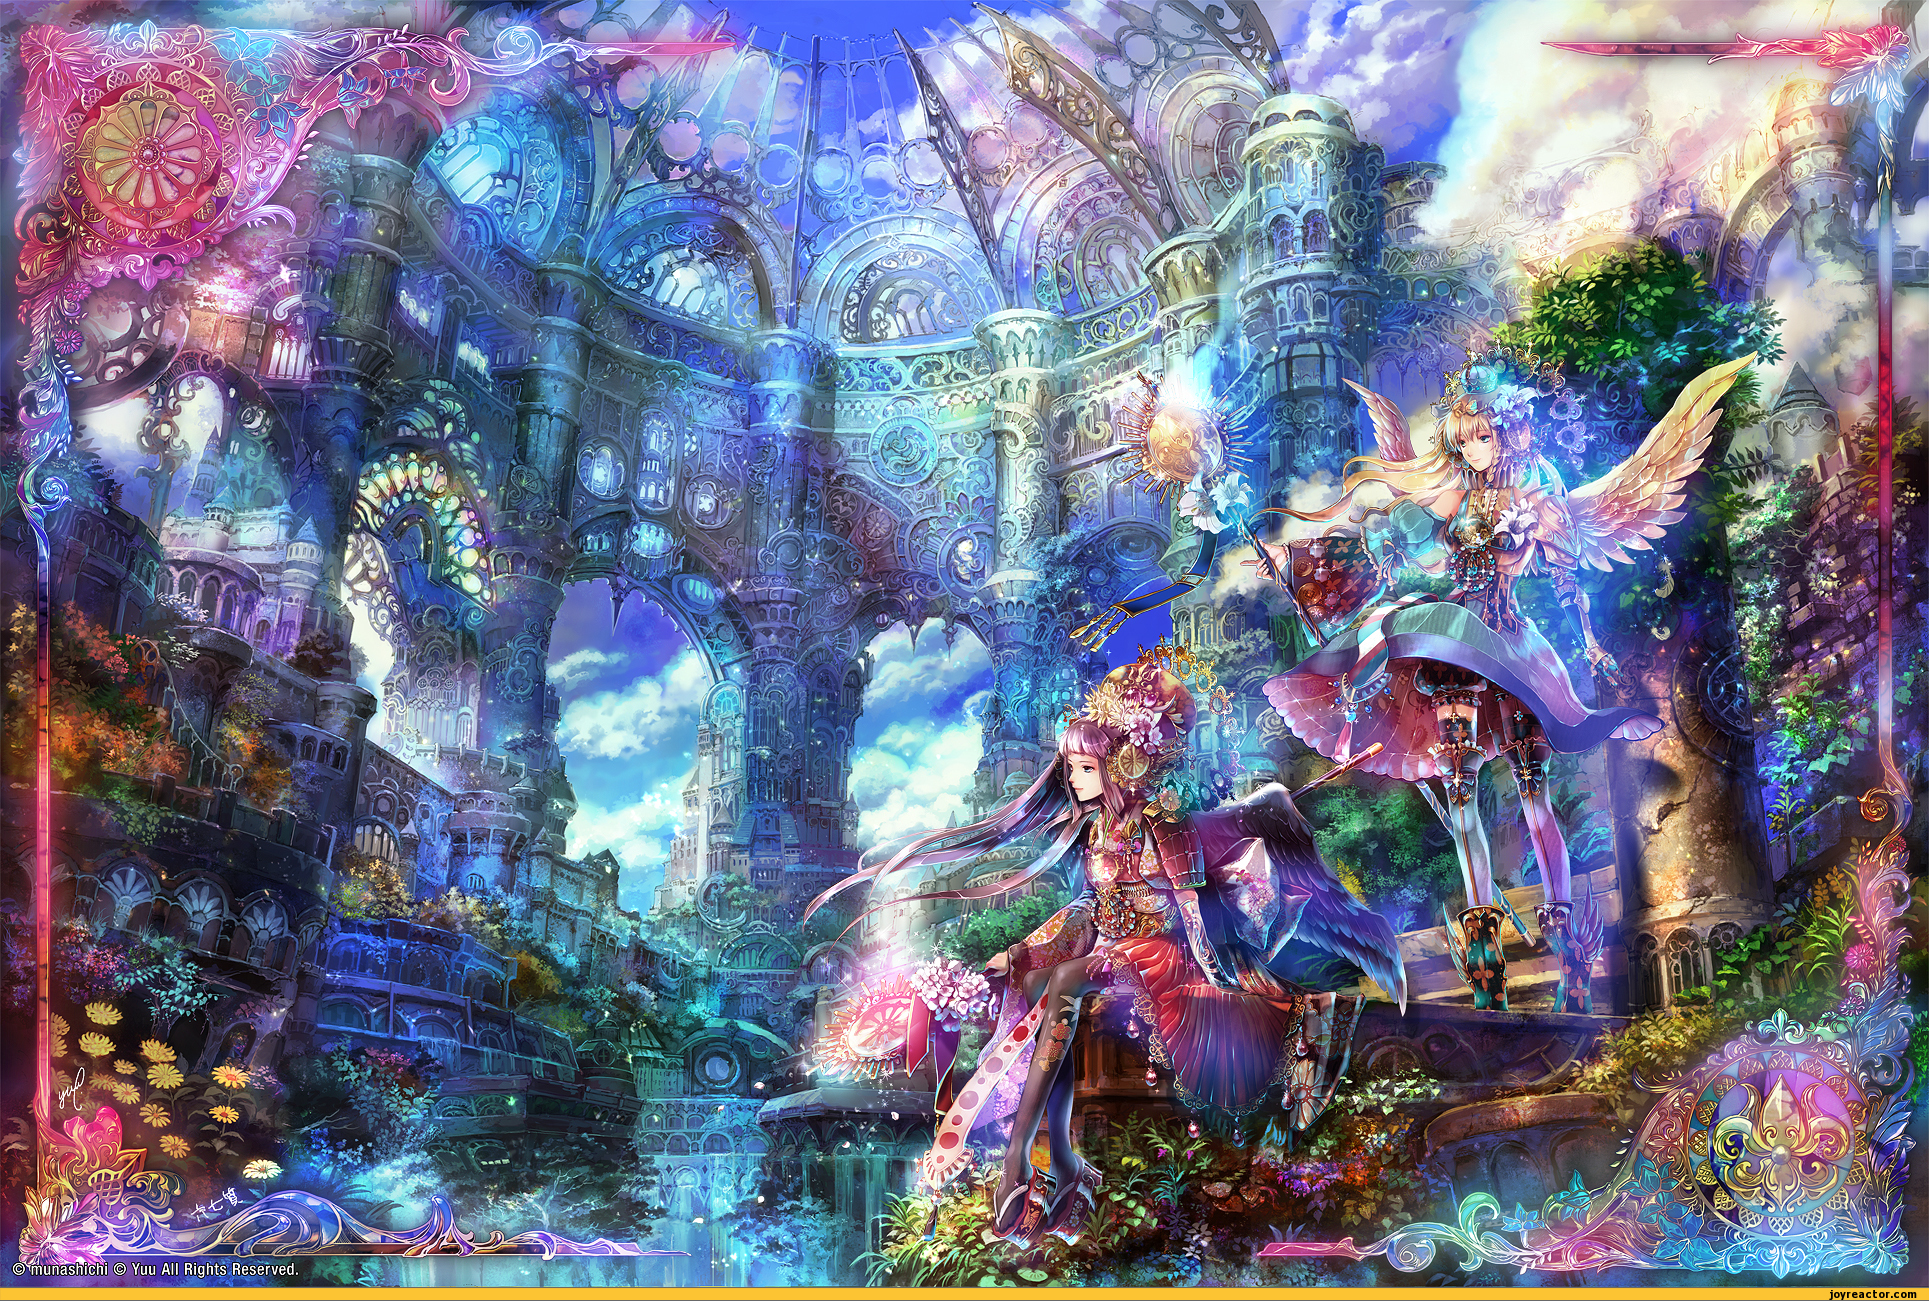 35,616 Anime Fantasy Background Images, Stock Photos & Vectors |  Shutterstock